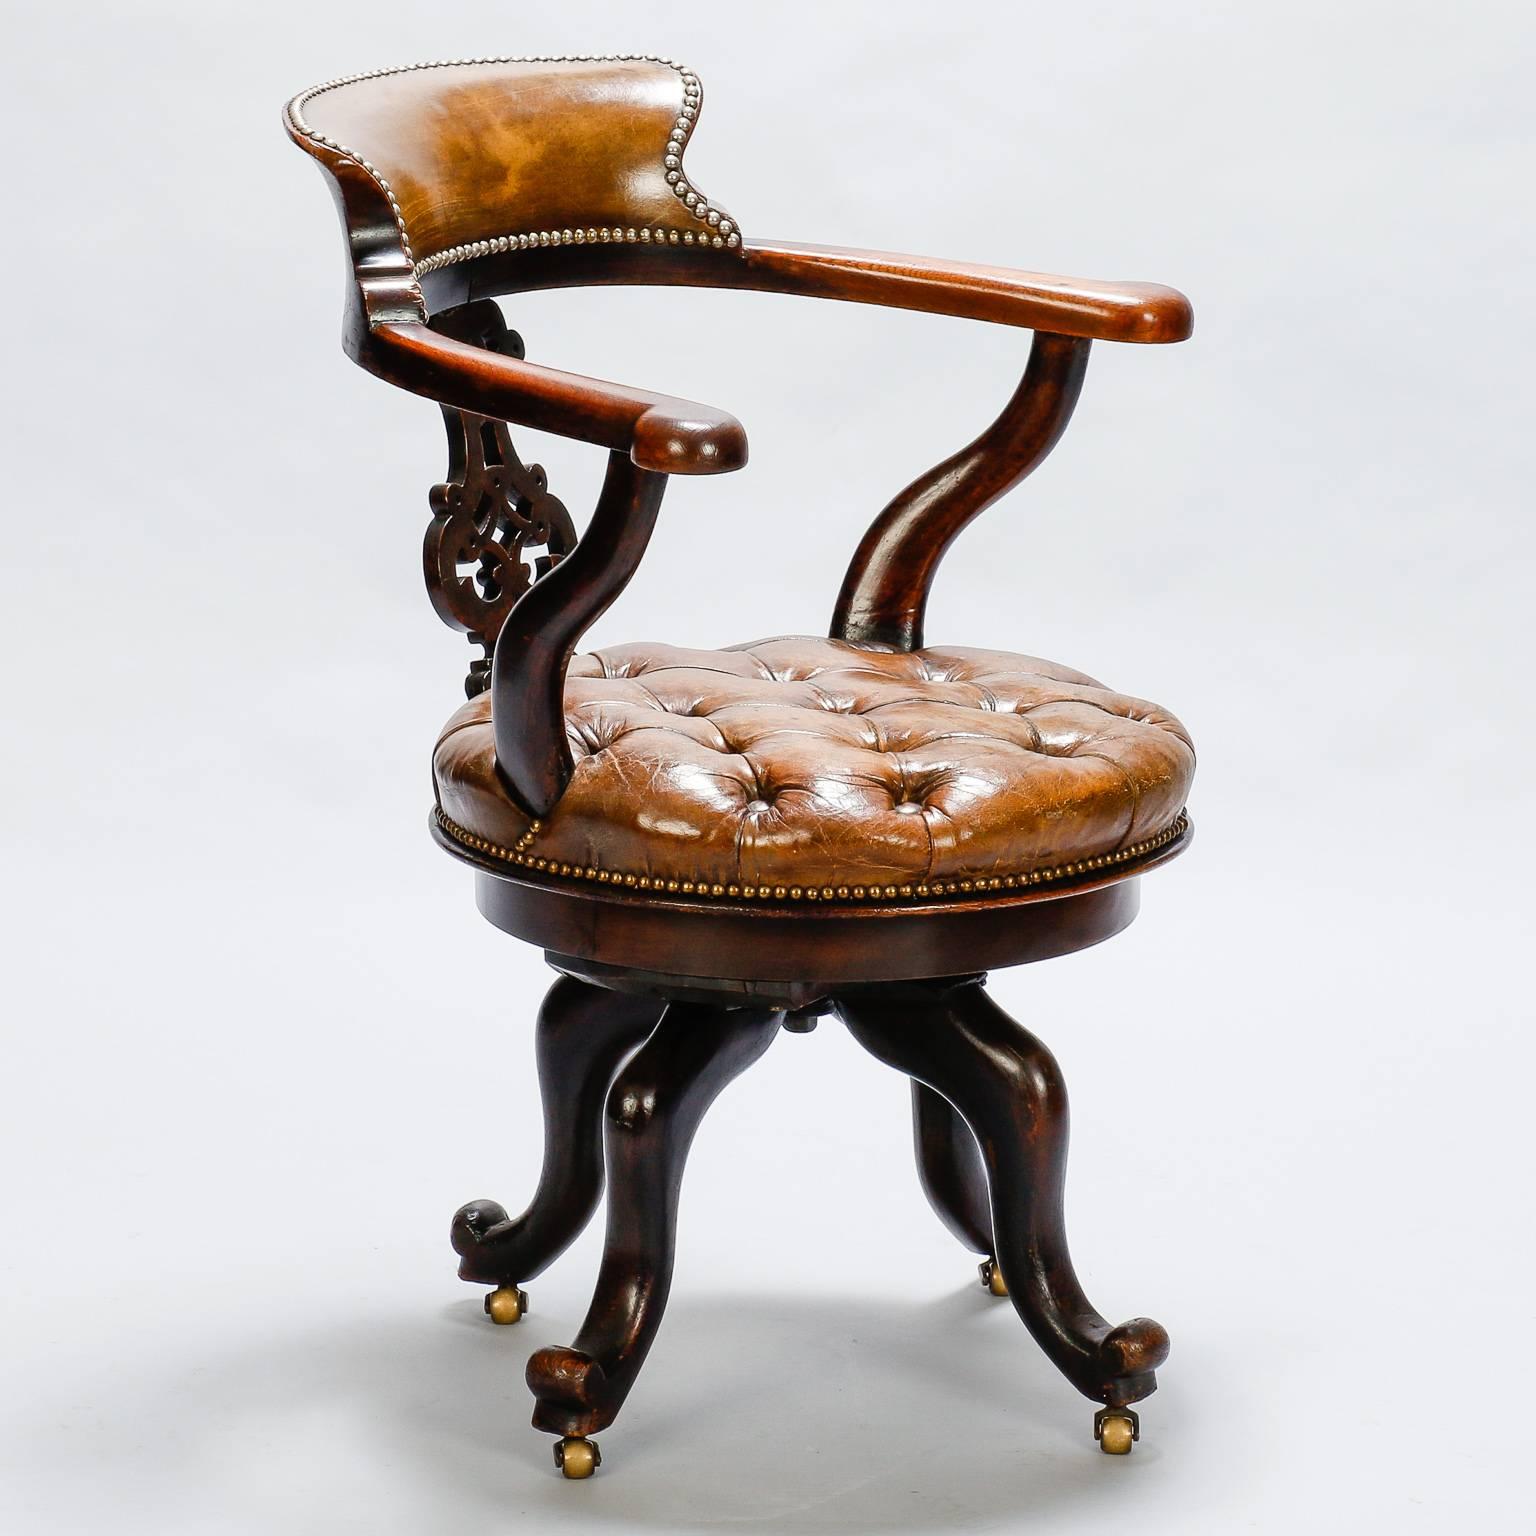 Circa 1920s French desk chair has mahogany frame with four cabriole legs on brass casters, a tufted leather seat that swivels, arms, a decorative carved back splat and padded leather back rest with brass nailheads. Seat is 19” high and 19” deep.